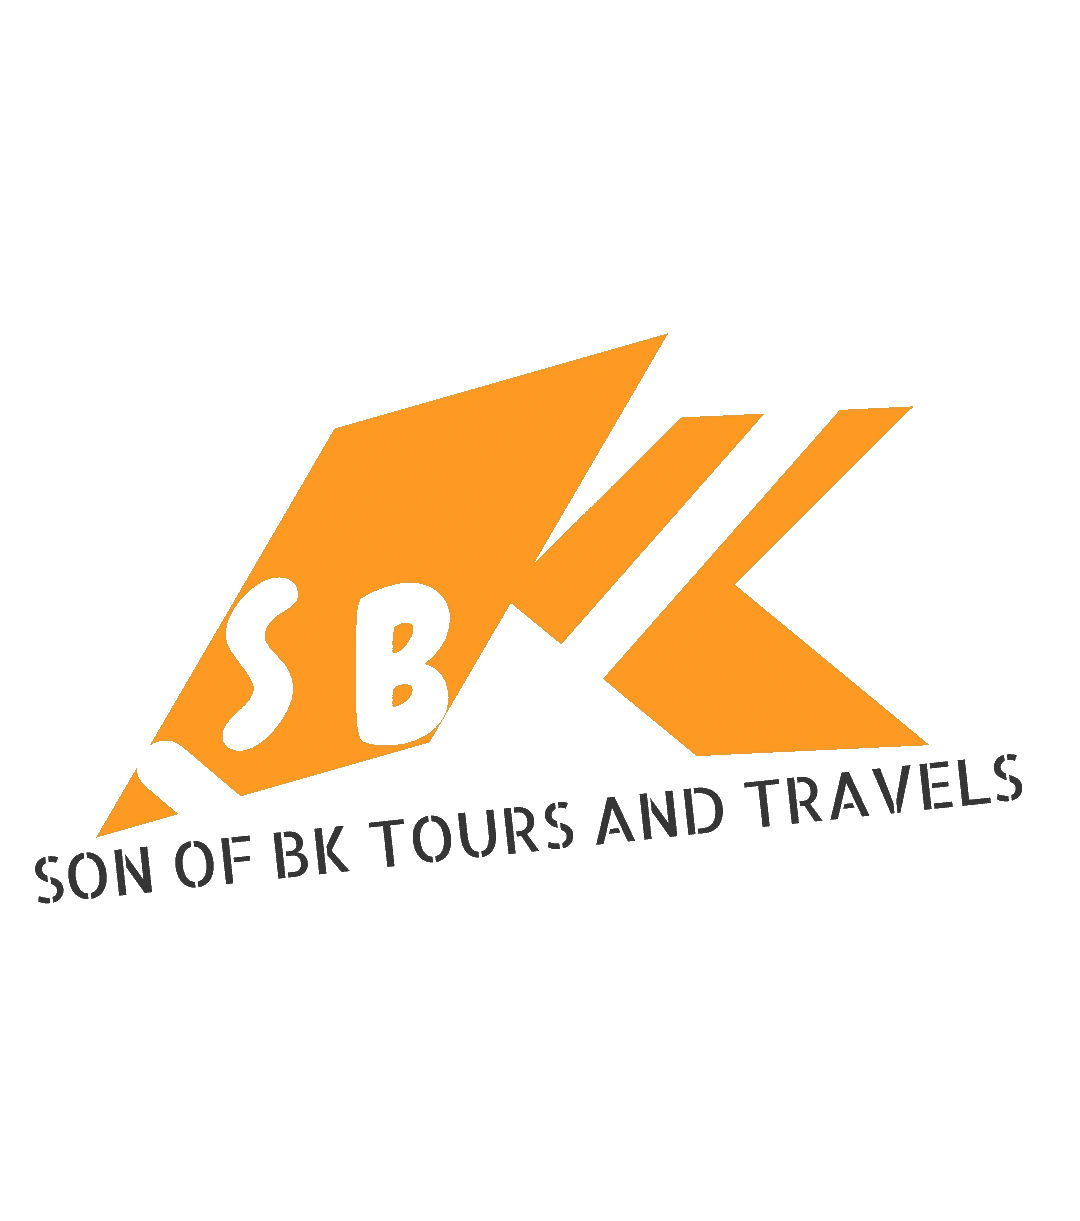 SON OF BK TOURS AND TRAVELS